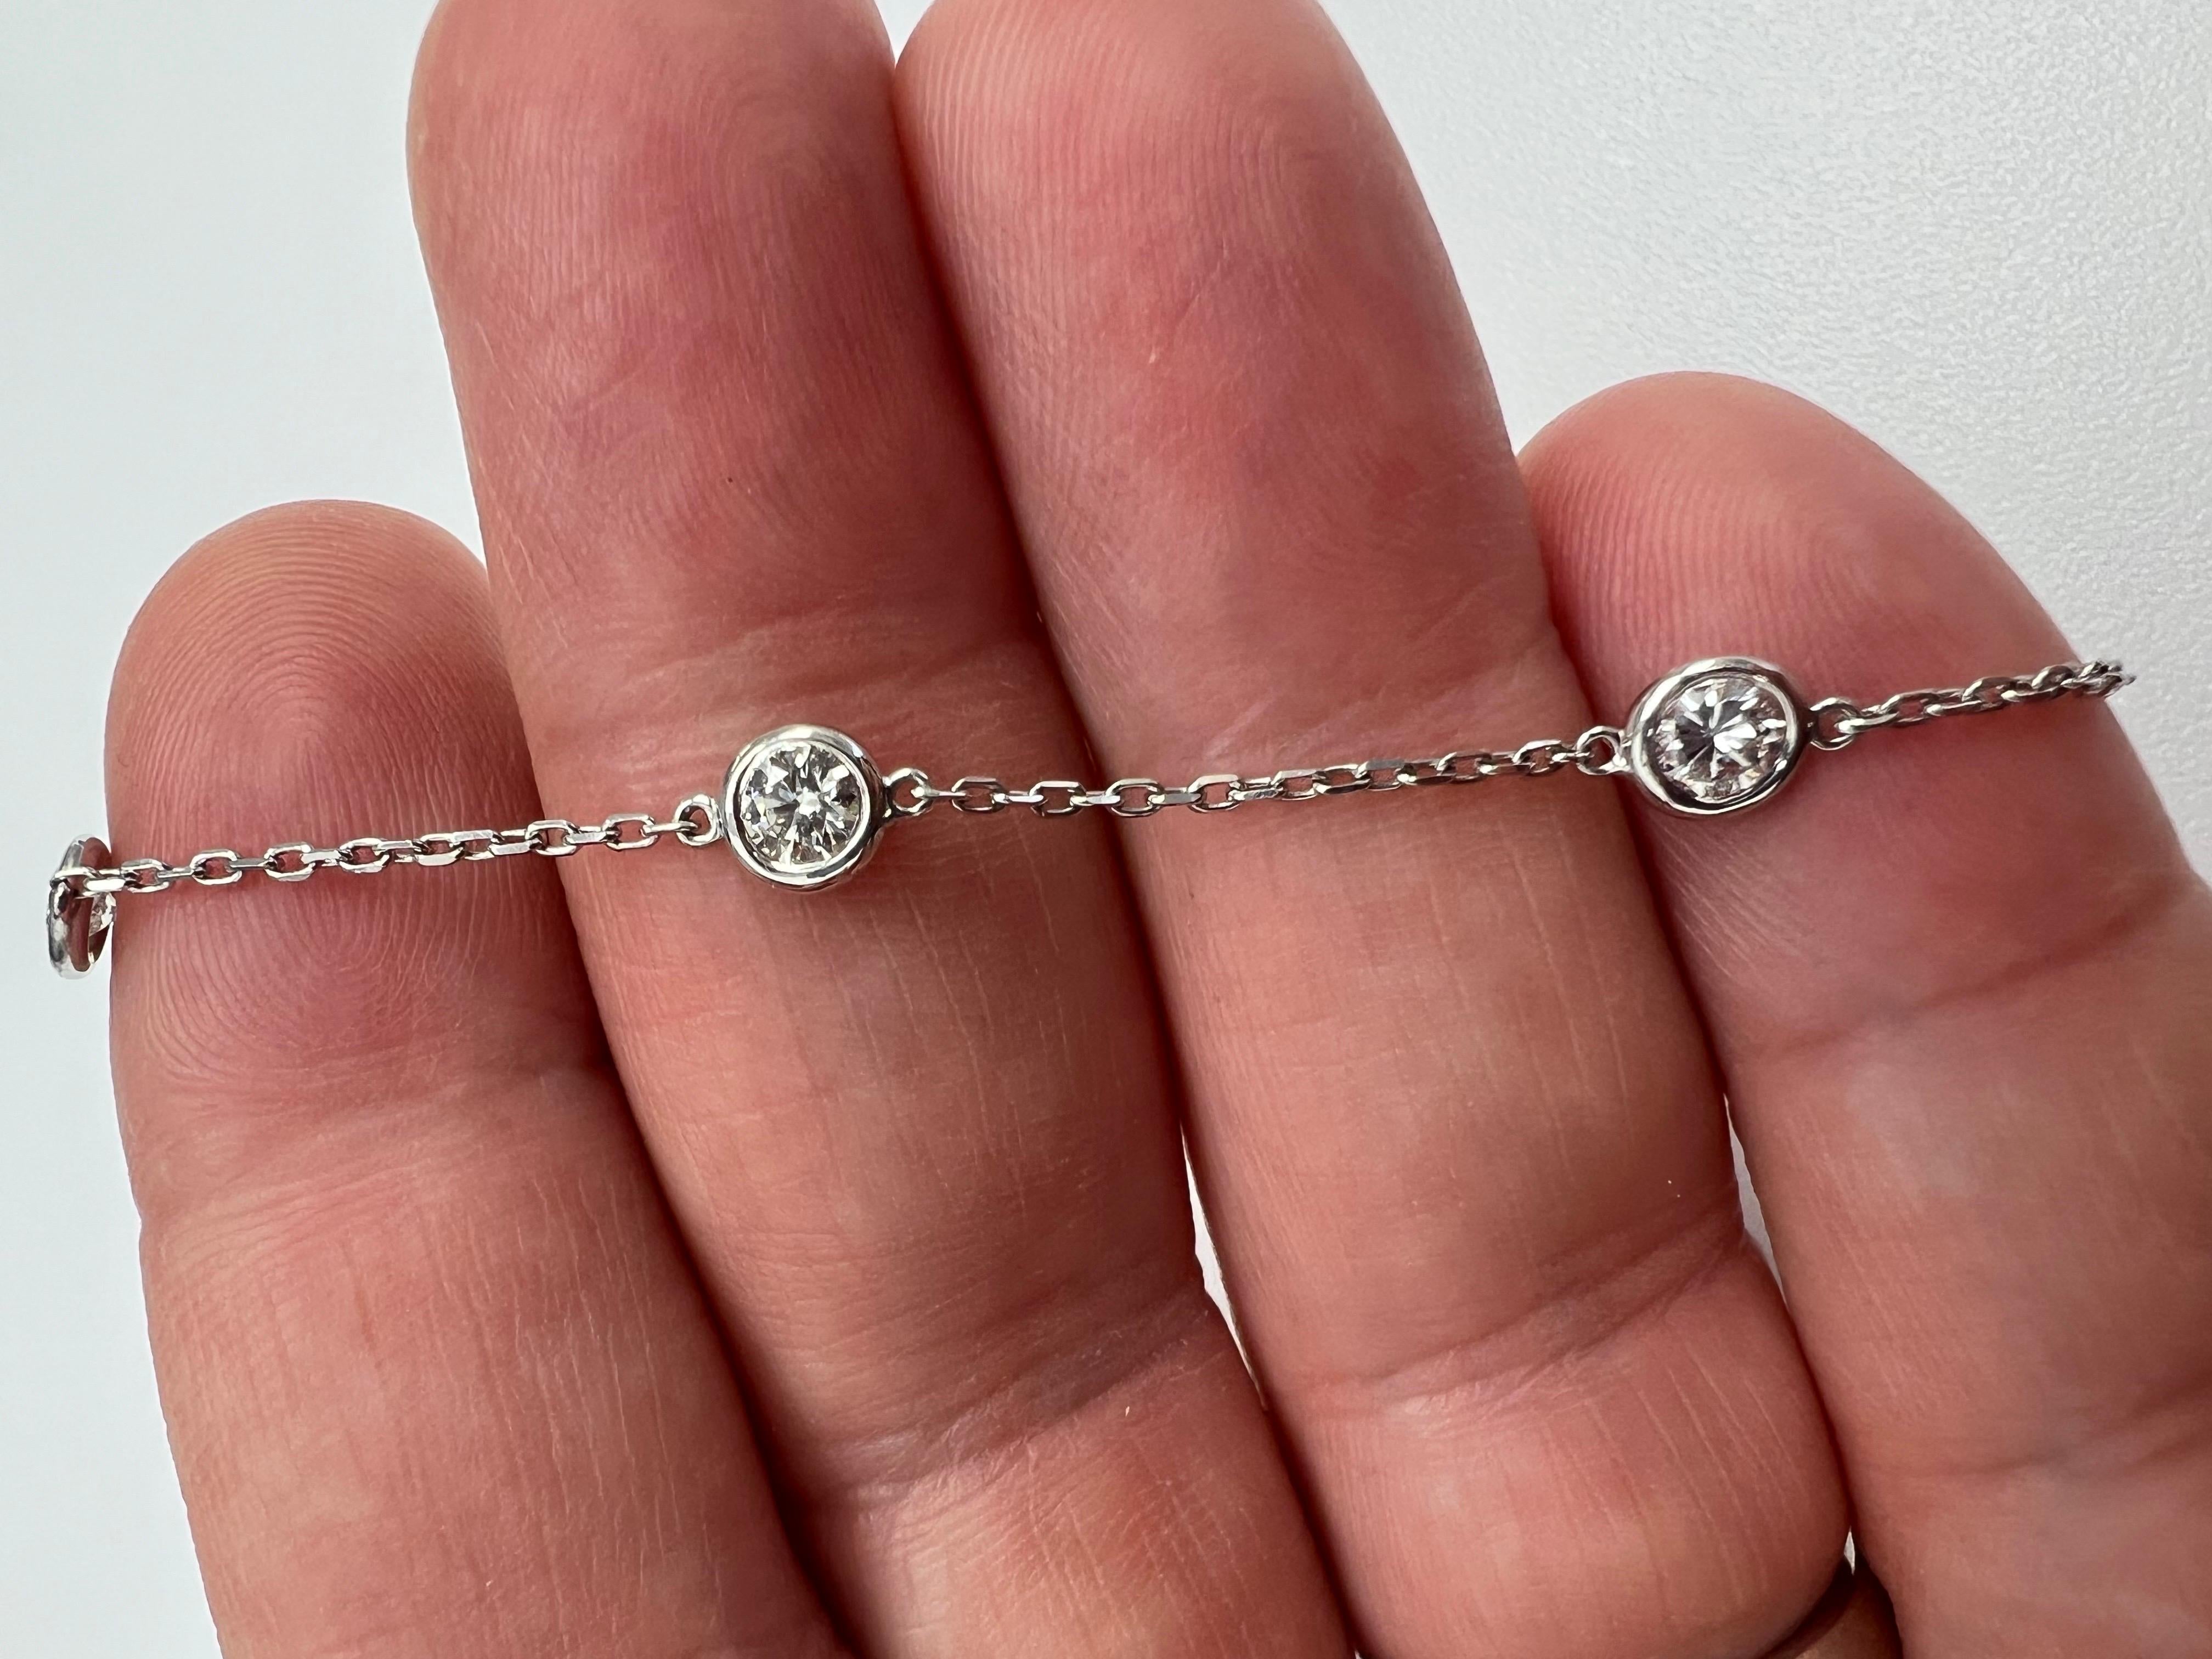 Diamond By The Yards Bracelet in 14k White Gold With 5 Natural Diamonds
5 Natural Full Brilliant Cut Diamonds
14K White Gold
1.00 Total Carat Weight
MADE IN USA
Best Seller Bracelet for every occasion
